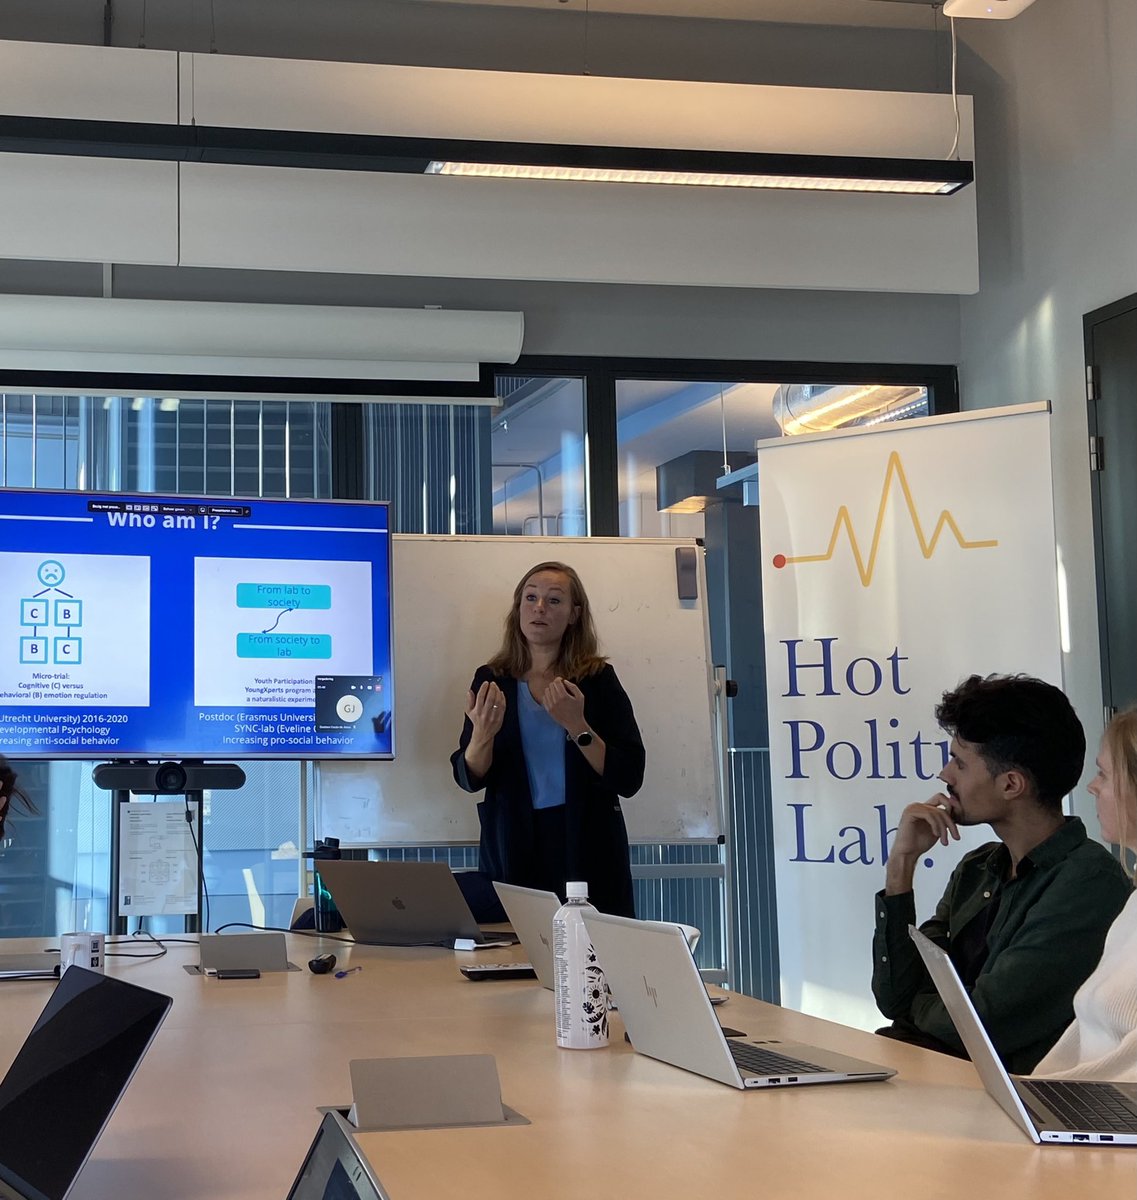 Last Friday, @L_teBrinke inspired us in the field of adolescent research. In addition to showing us the results of her study on adolescents’ contribution to society, she showed us the importance of involving adolescents in the entire research process! #HotPoliticsLab